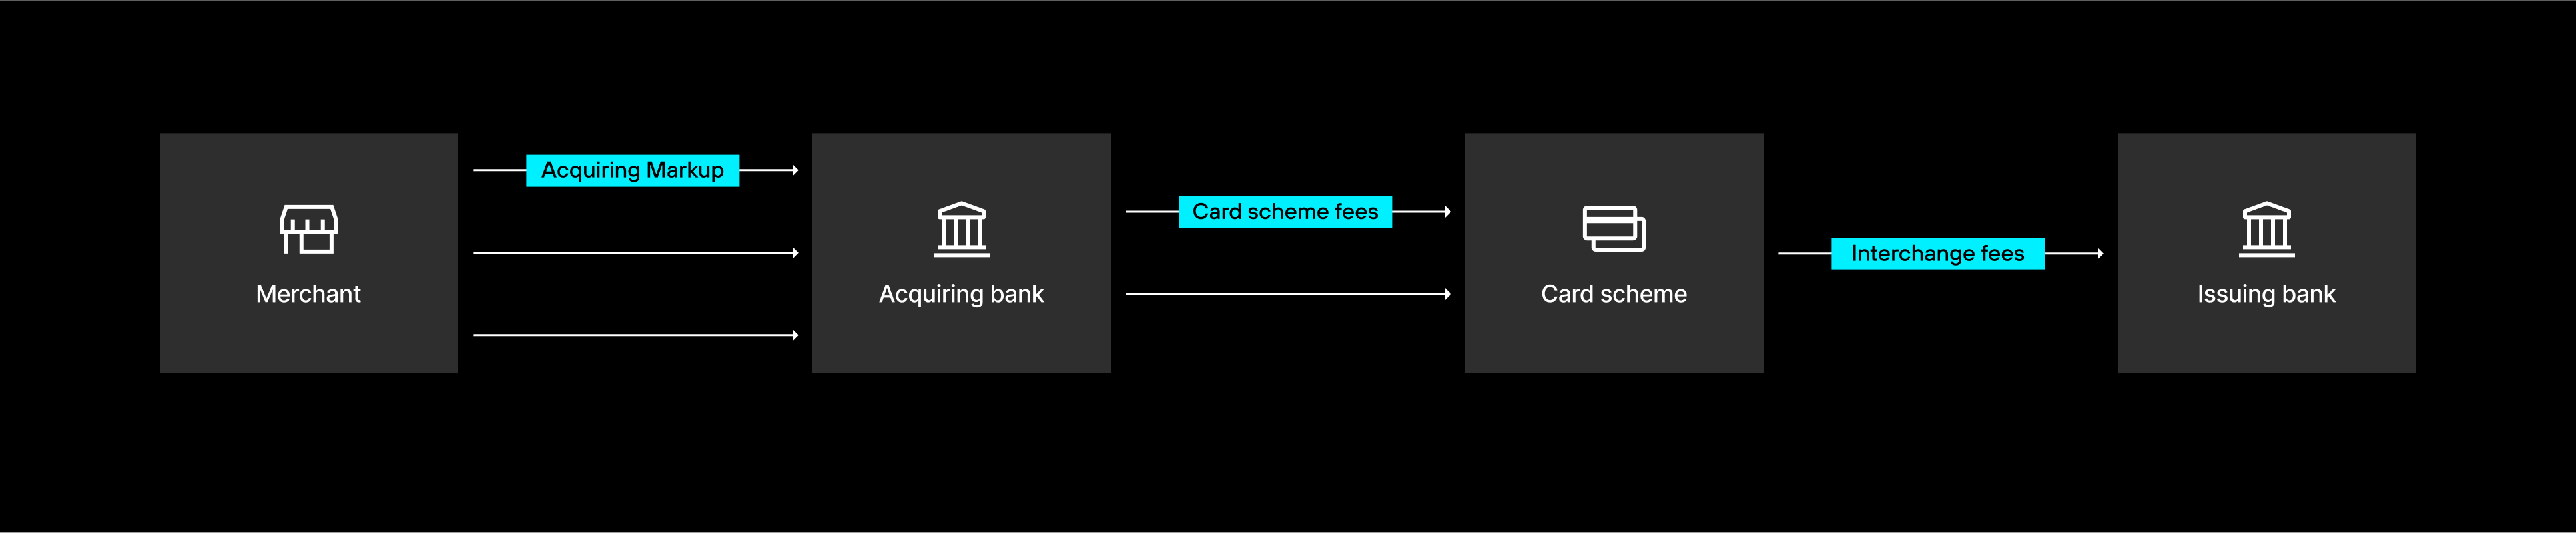 payment fees flow